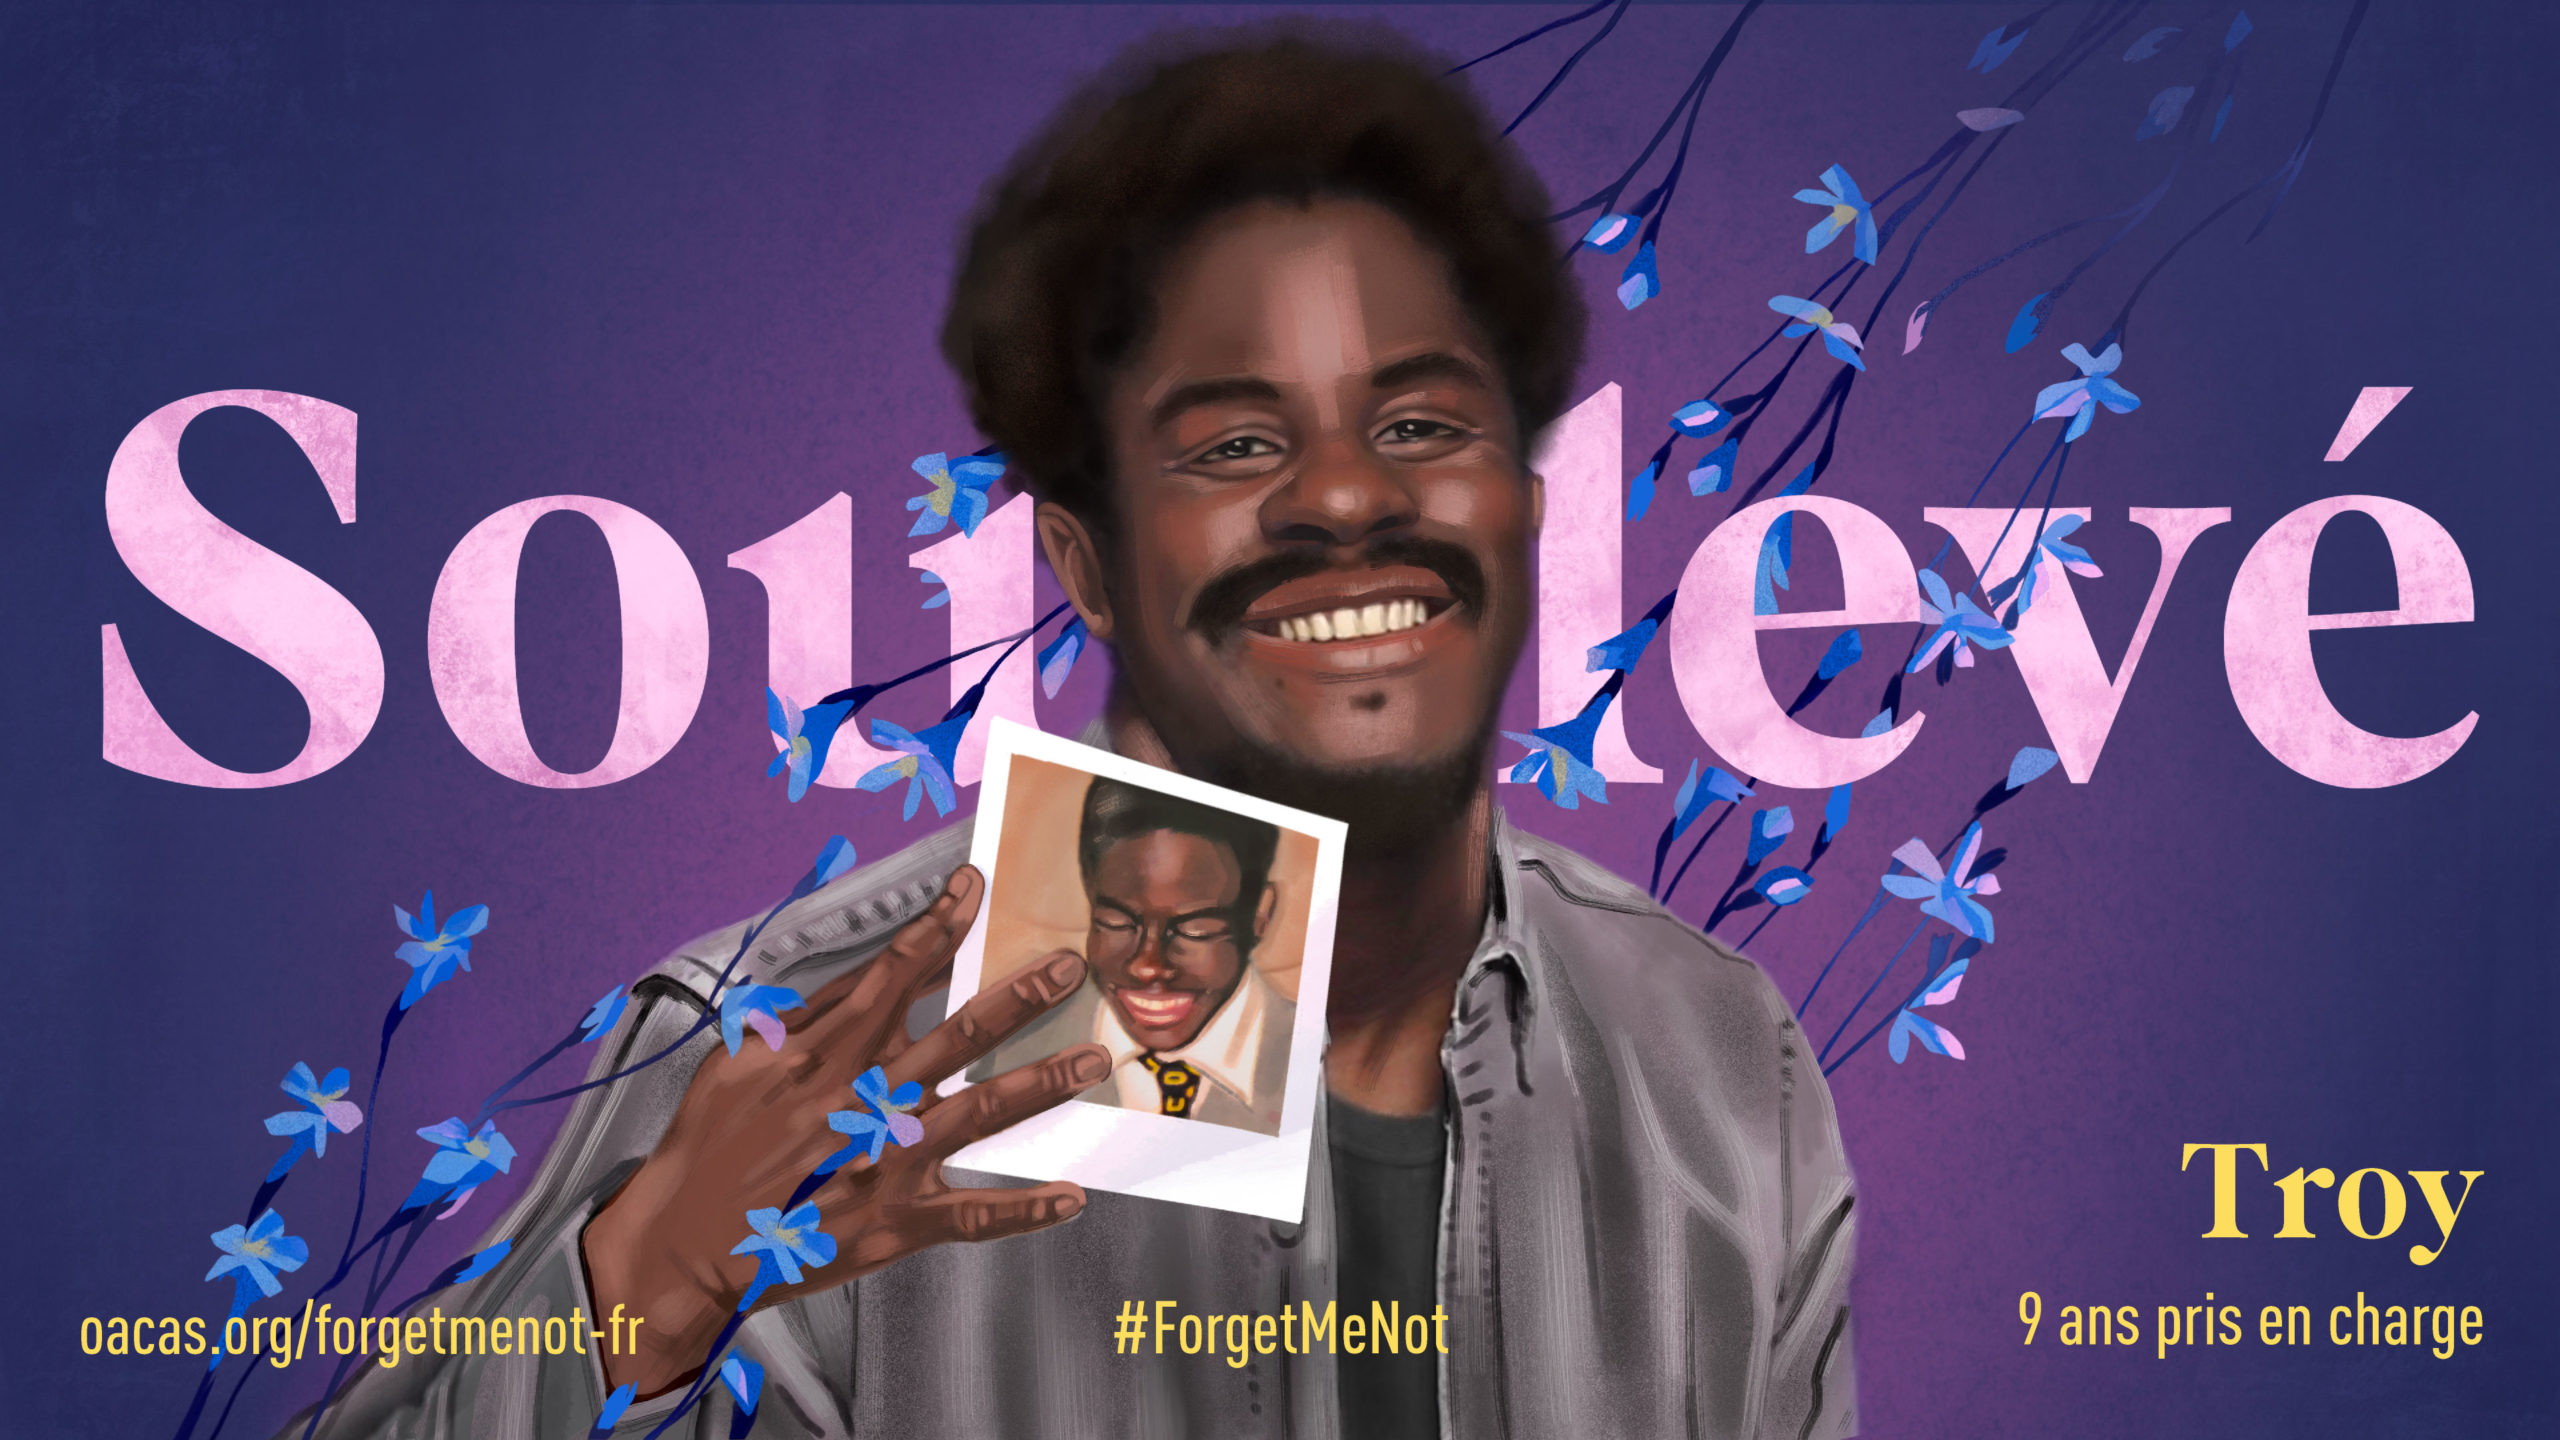 ILLUSTRATION OF BLACK MAN HOLDING A POLAROID OF A BABY PHOTO WITH WORDS LIFTED BEHIND HIM